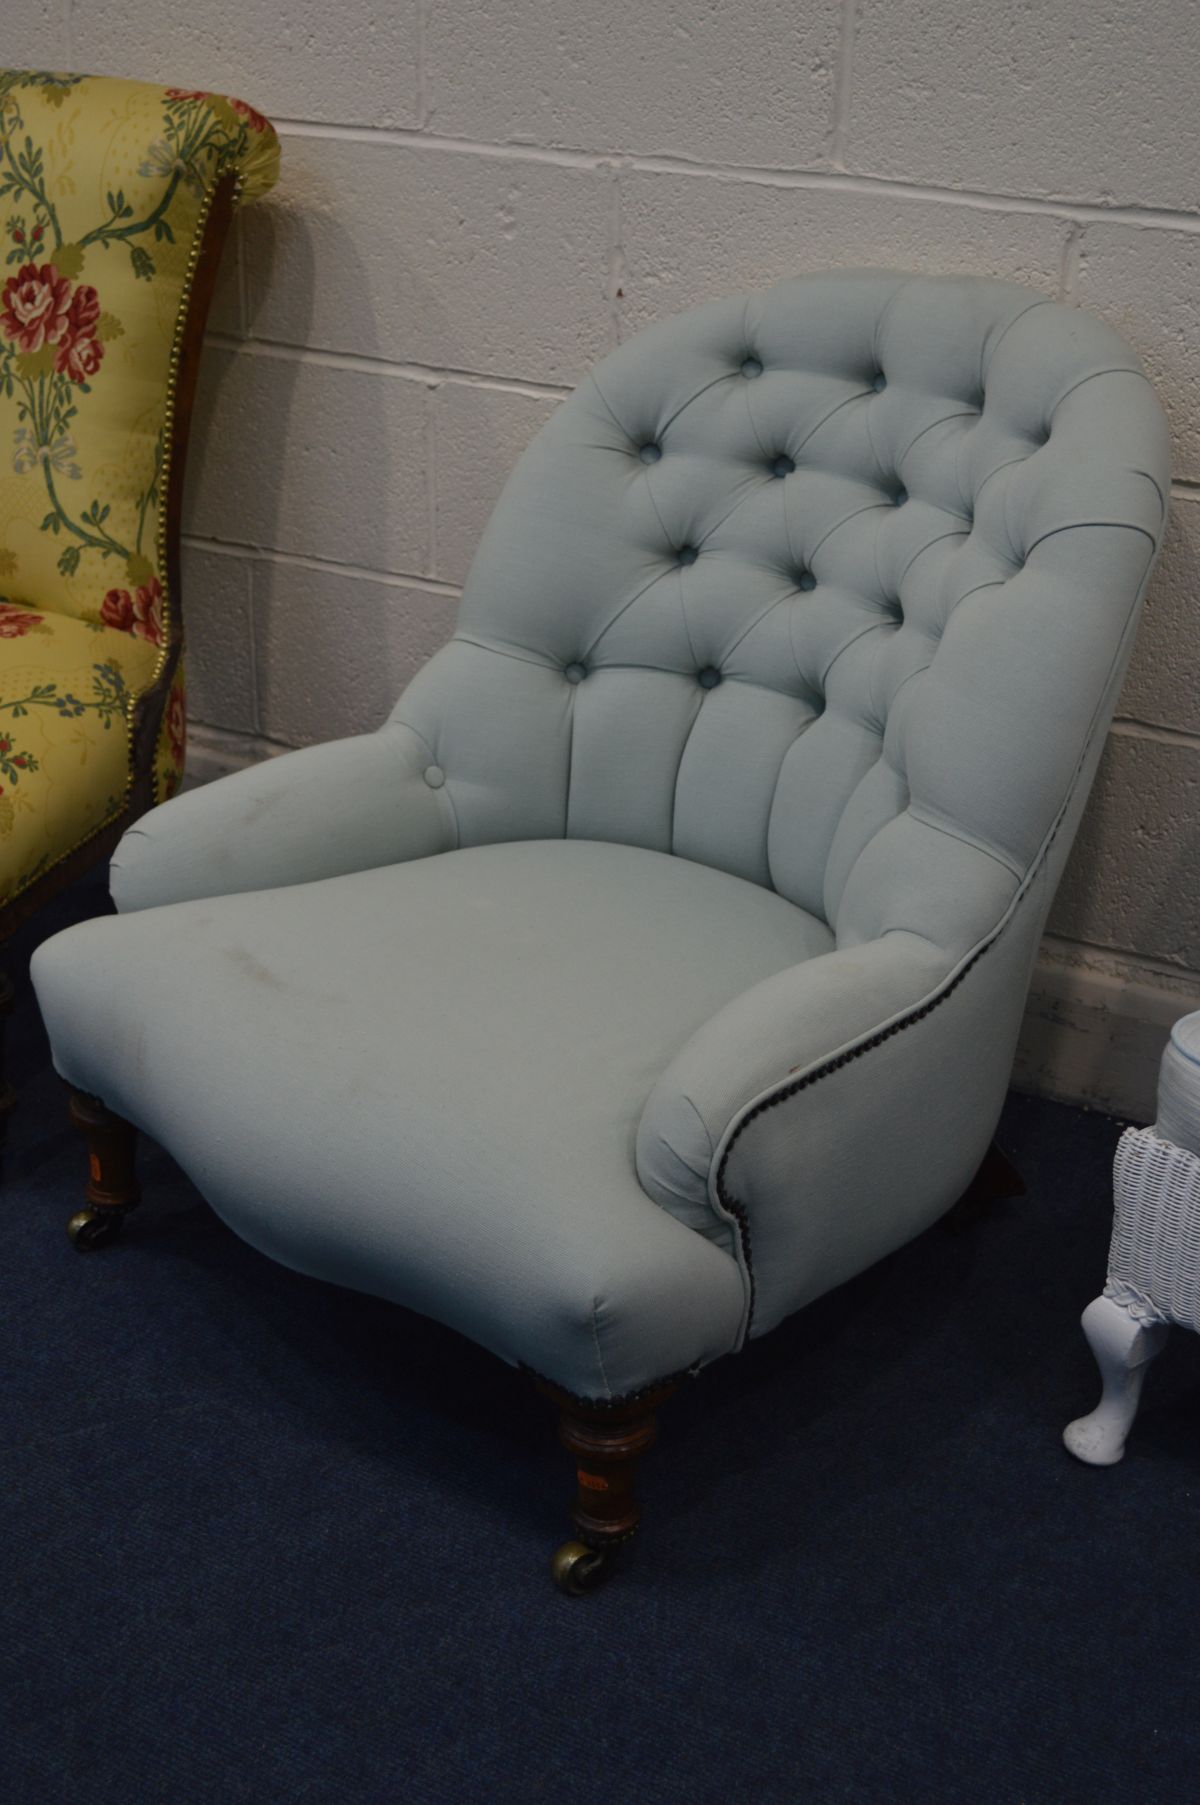 TWO LATE VICTORIAN CHAIRS, one with a scrolled back, the other button back, and a Lloyd Loom bedroom - Image 3 of 4